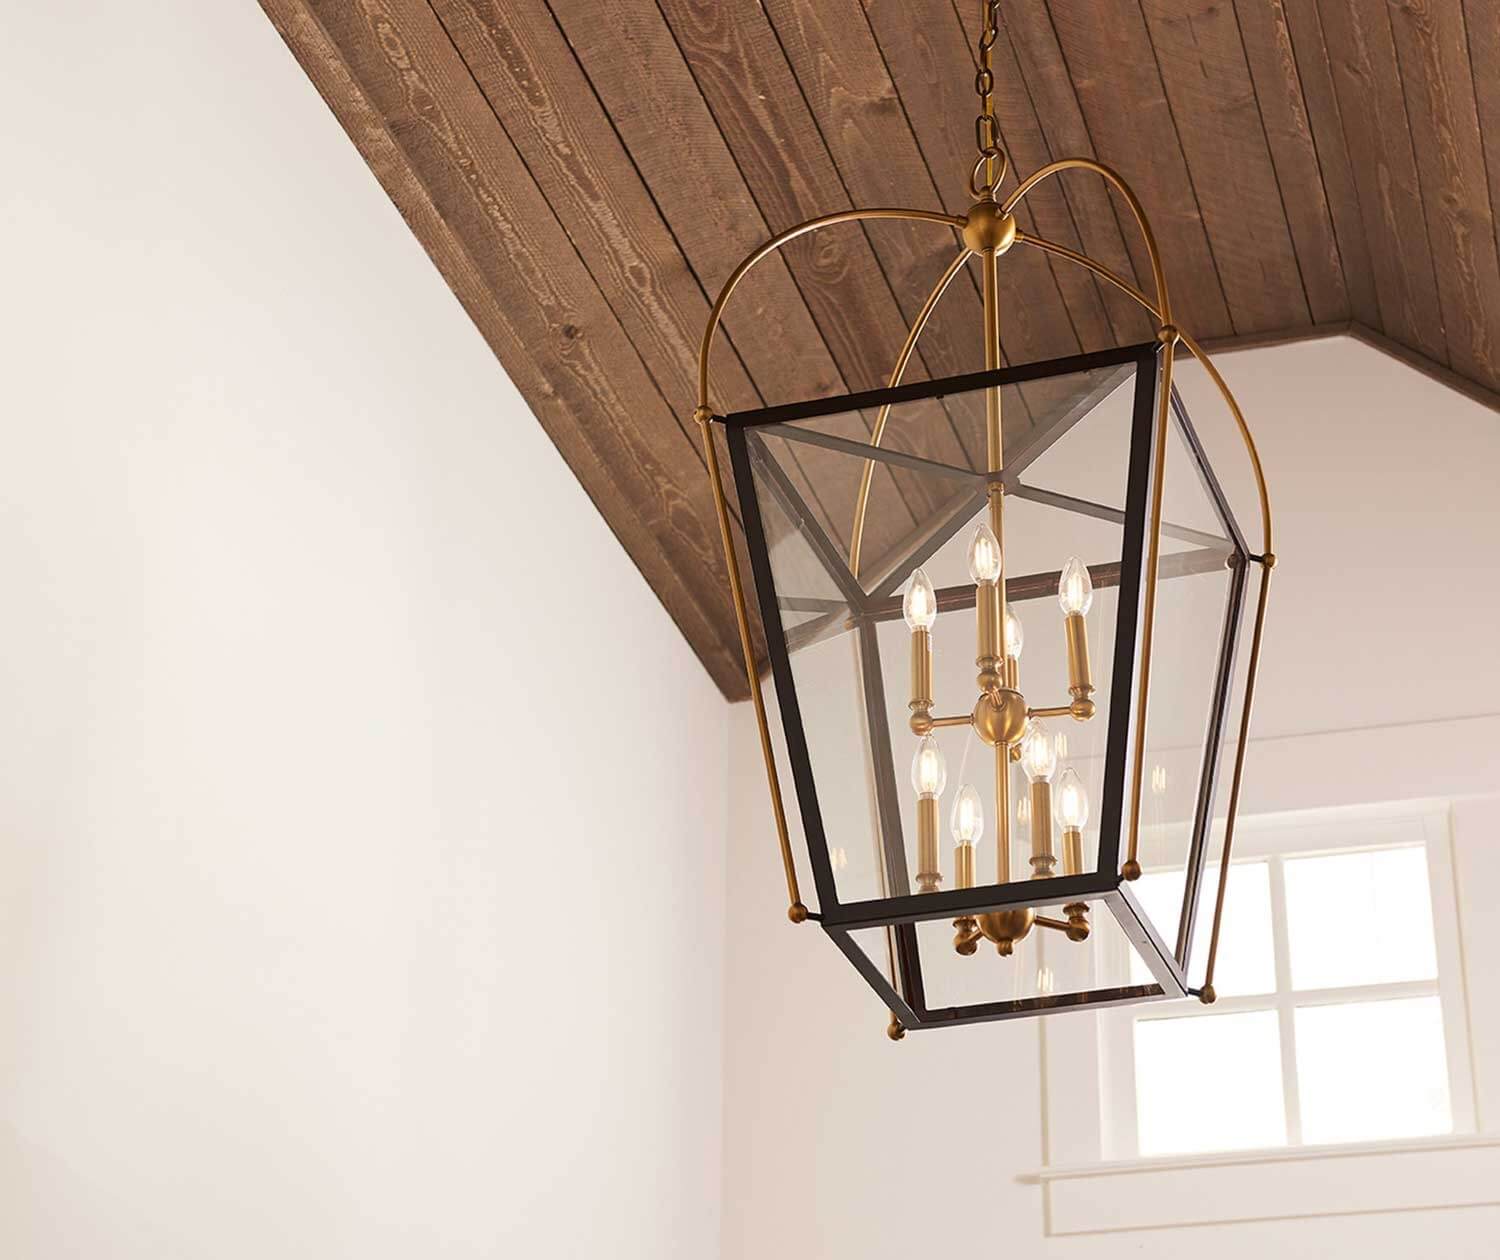 Light hanging from wooden ceiling